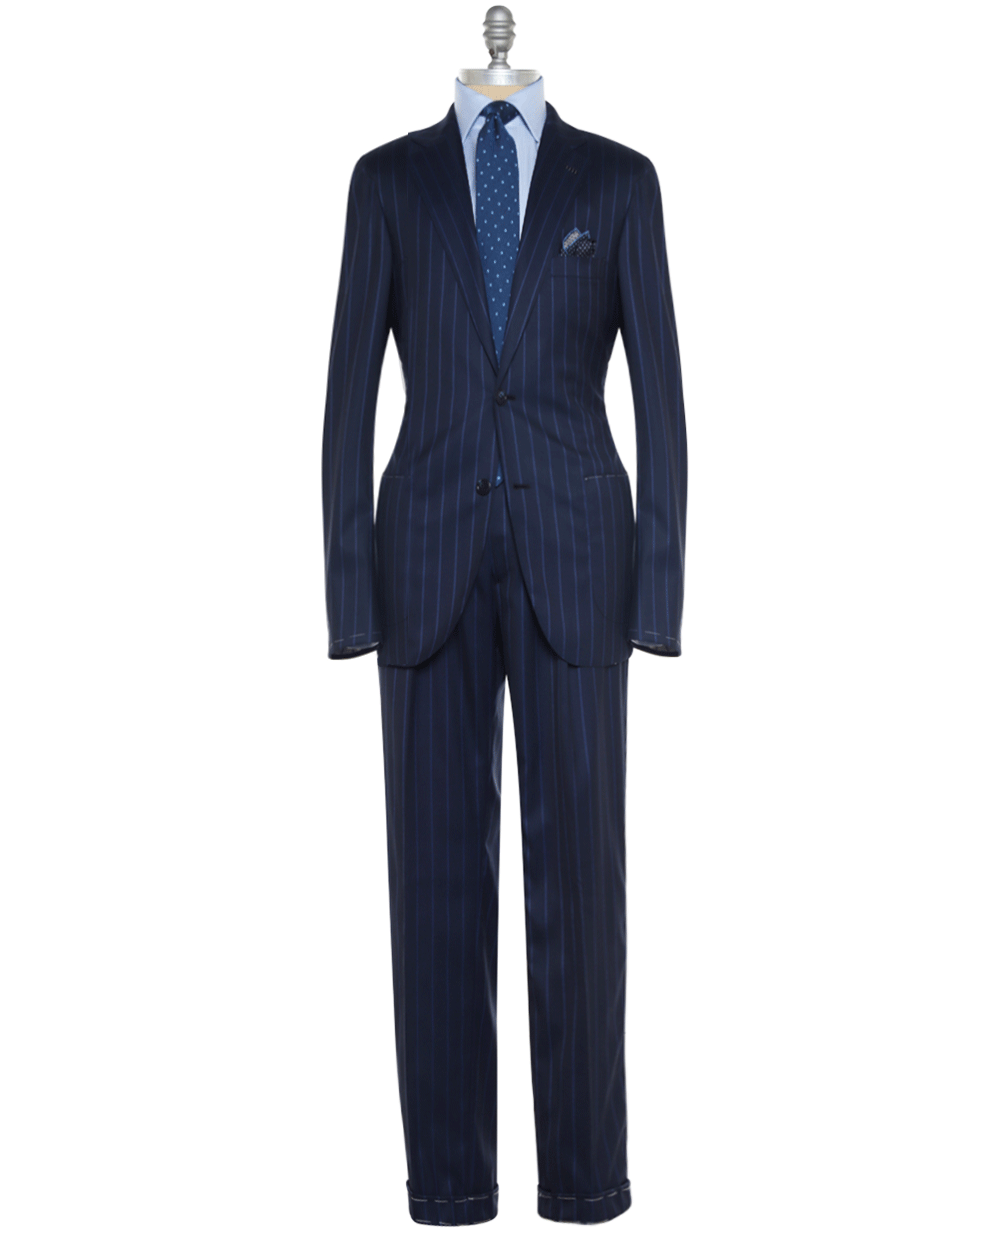 Navy and Sapphire Pinstriped Stretch Suit